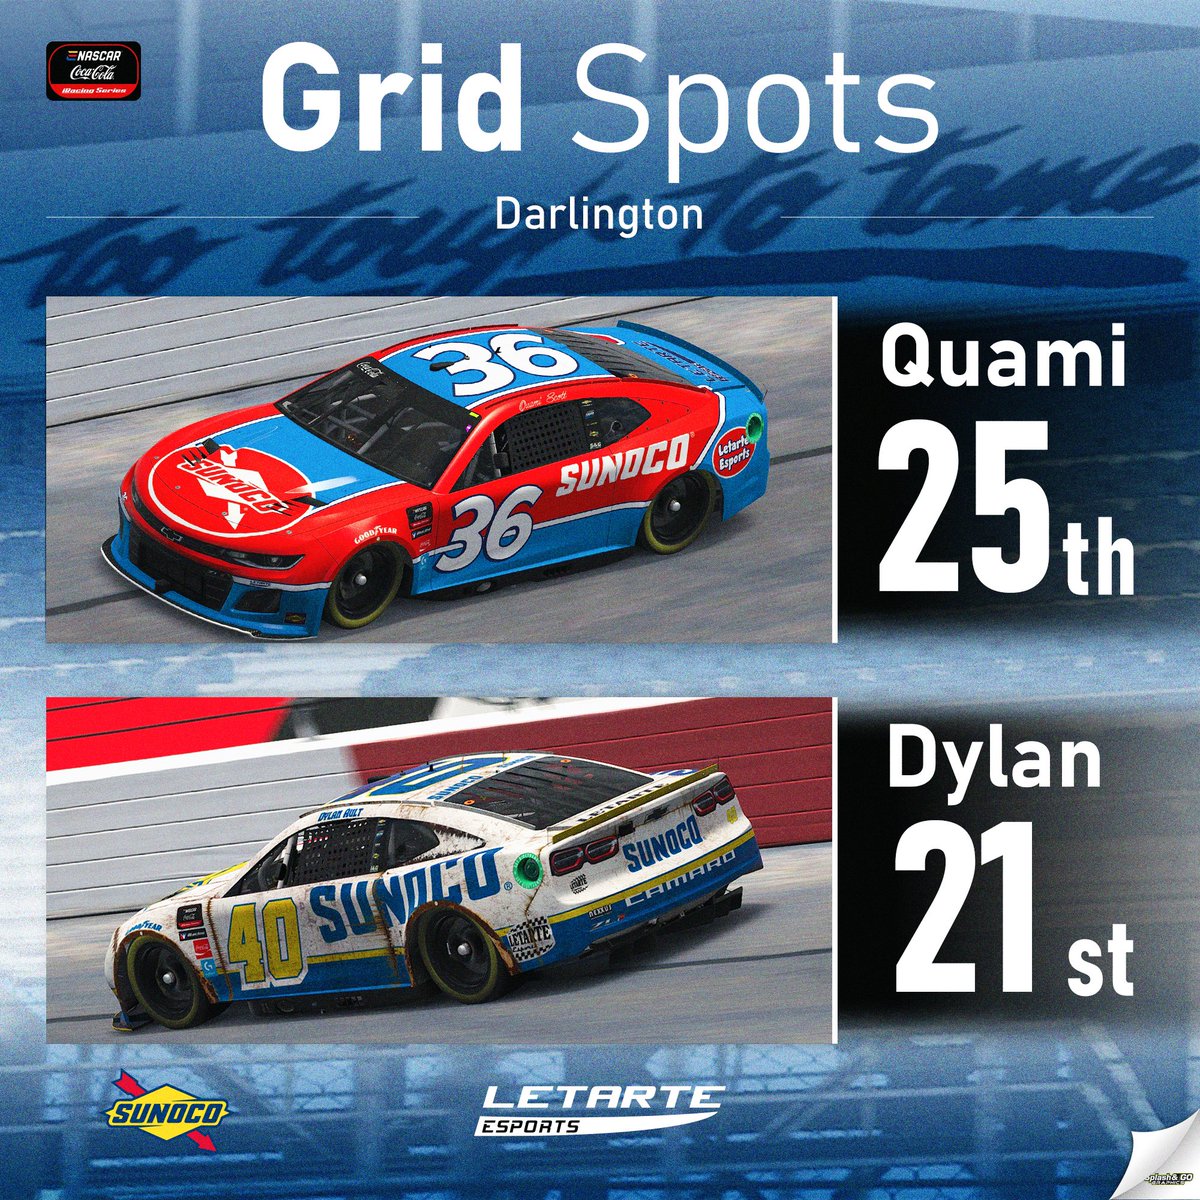 Where we roll off for tonight’s @ENASCARGG @CocaColaRacing @iRacing Series event from @TooToughToTame!

@dylanault42: P 2️⃣1️⃣
@YungQuami: P 2️⃣5️⃣

📺: eNASCAR.com/Live / Twitch.tv/Ault_F4 / Twitch.tv/YungQuami

@SunocoRacing
#eCCiS / #eNASCAR / #FuelingVictories